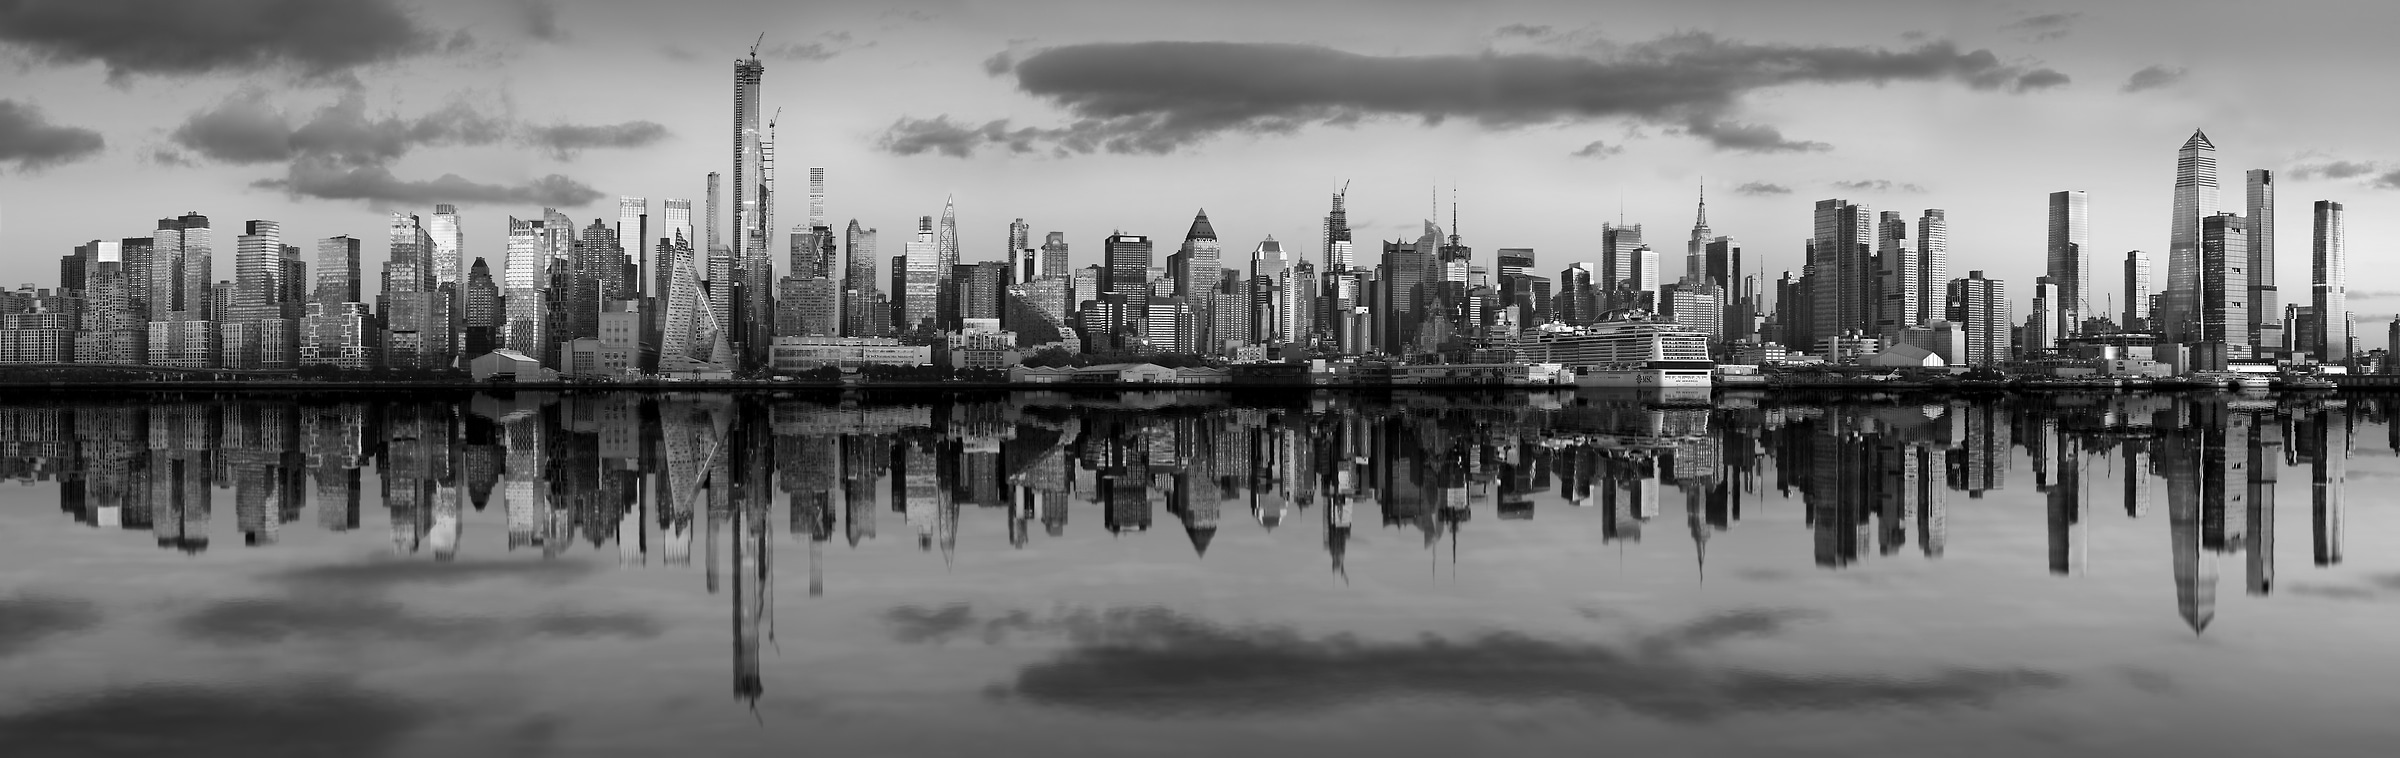 922 megapixels! A very high resolution, black & white VAST photo print of the New York skyline at sunset reflecting in the Hudson River; panorama photograph created by Phil Crawshay in New York, Manhattan.